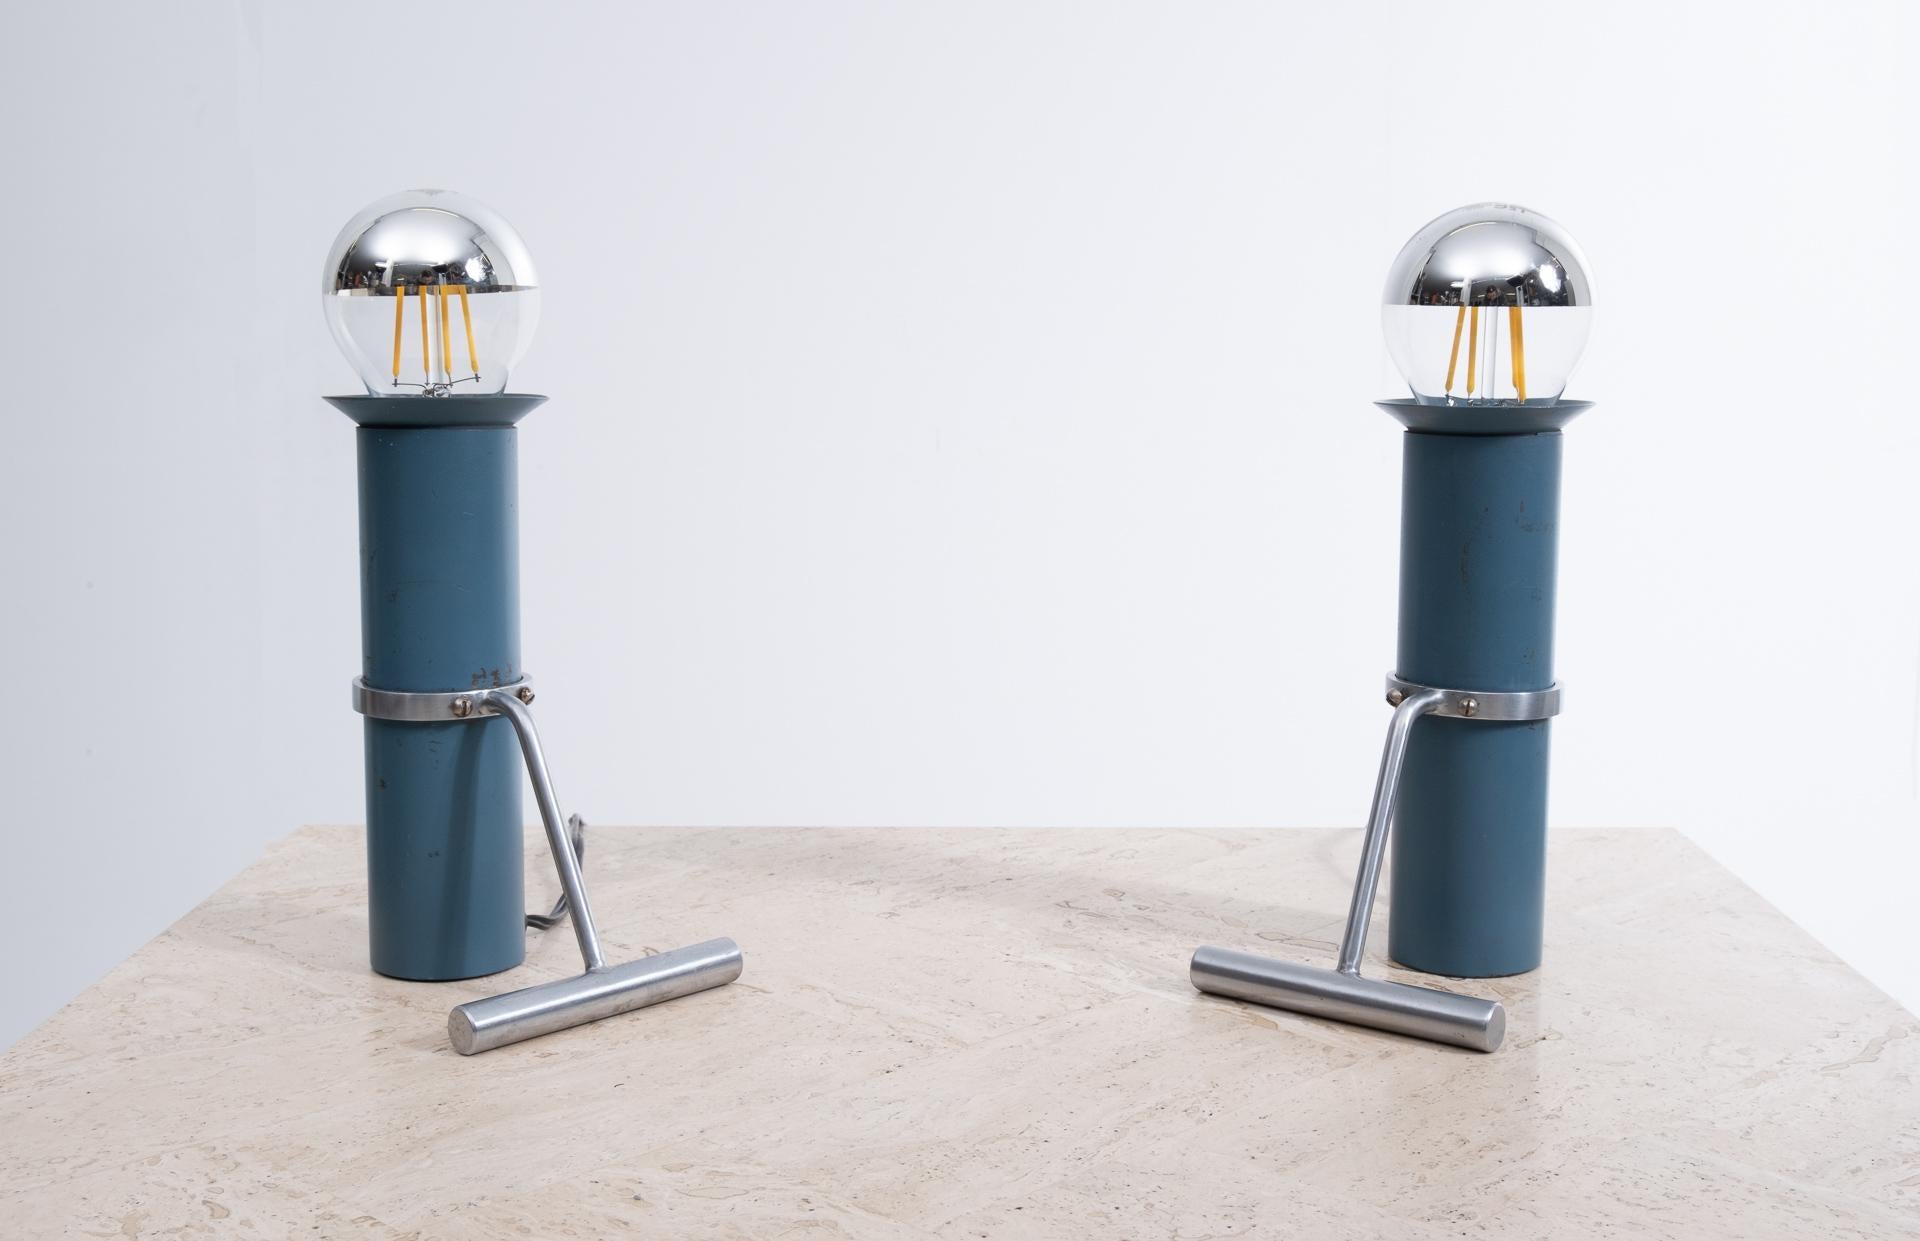 Two beautiful table lamps. Design by Tapio Wirkkala for Idman, Finland, 1960s. Petrol blue metal cylinder base
comes with polished steel feet. Completely original.